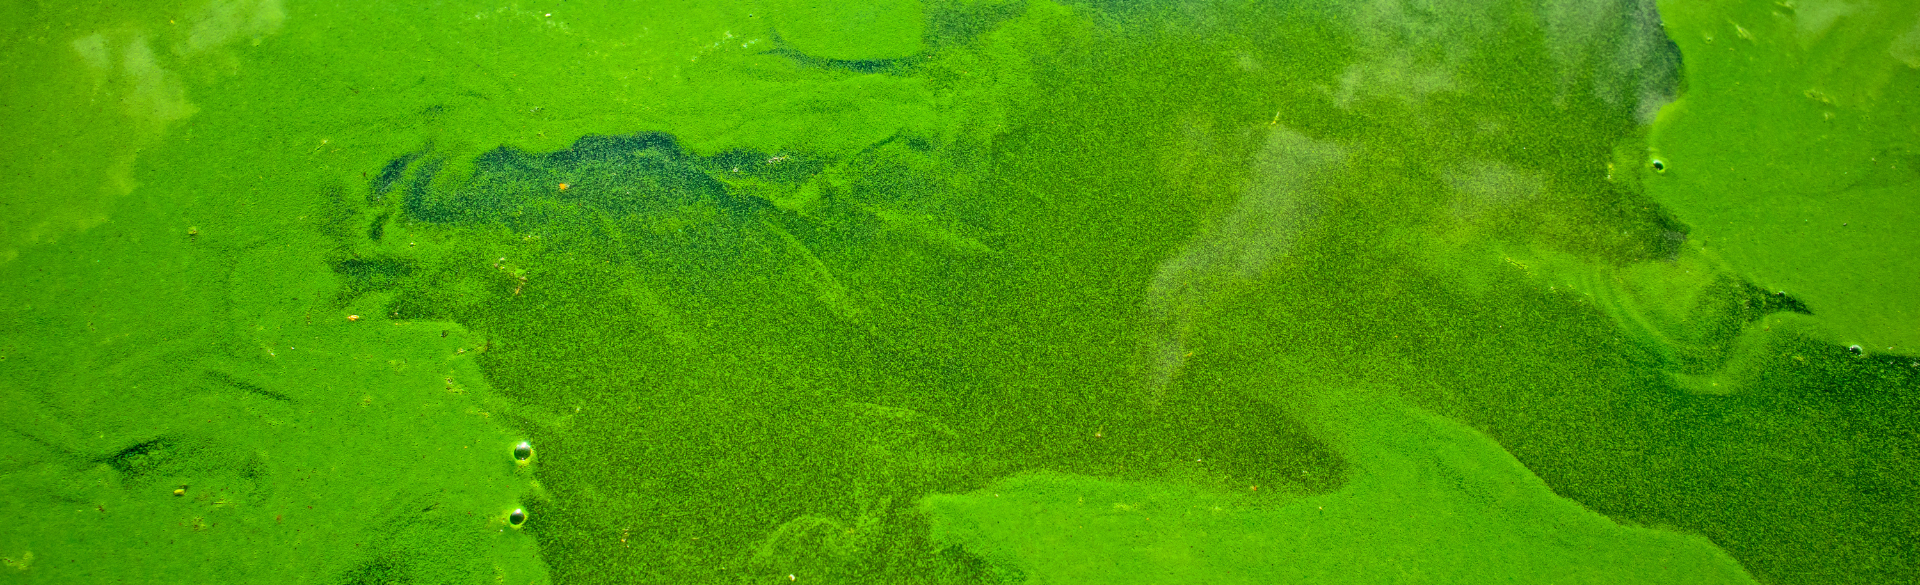 Summer Heat Gives Rise to Algal Blooms and Health Concerns